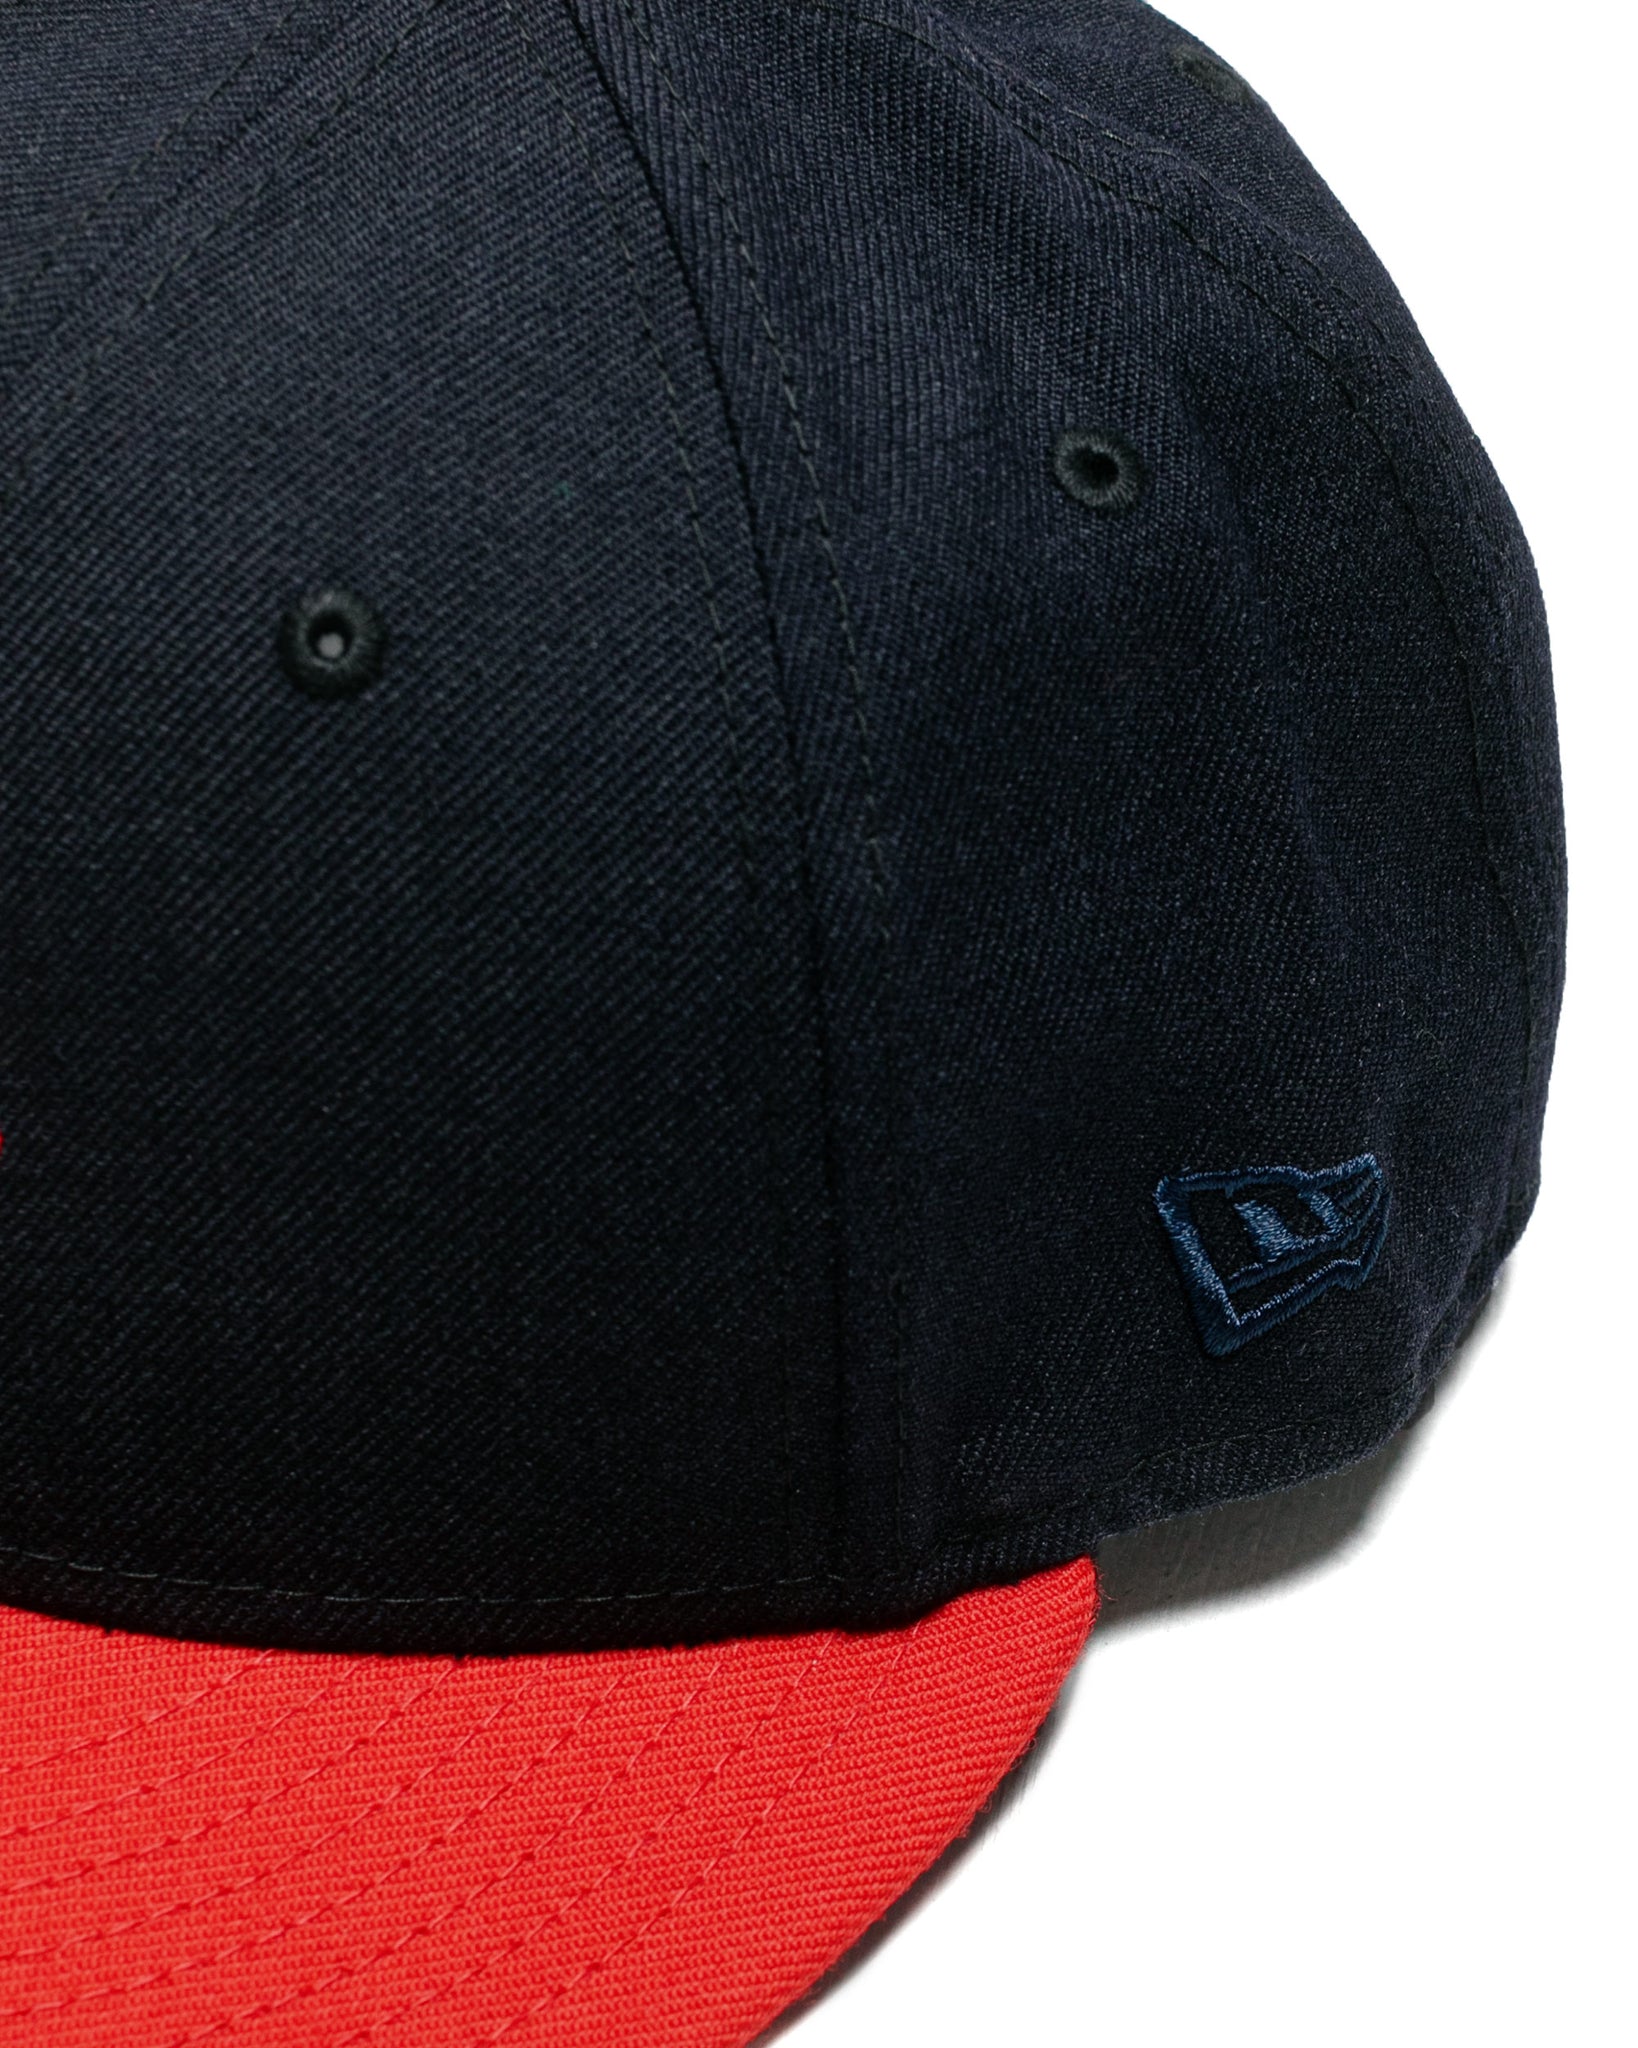 Lost & Found x New Era Low Profile 59FIFTY Cap NavyRed side